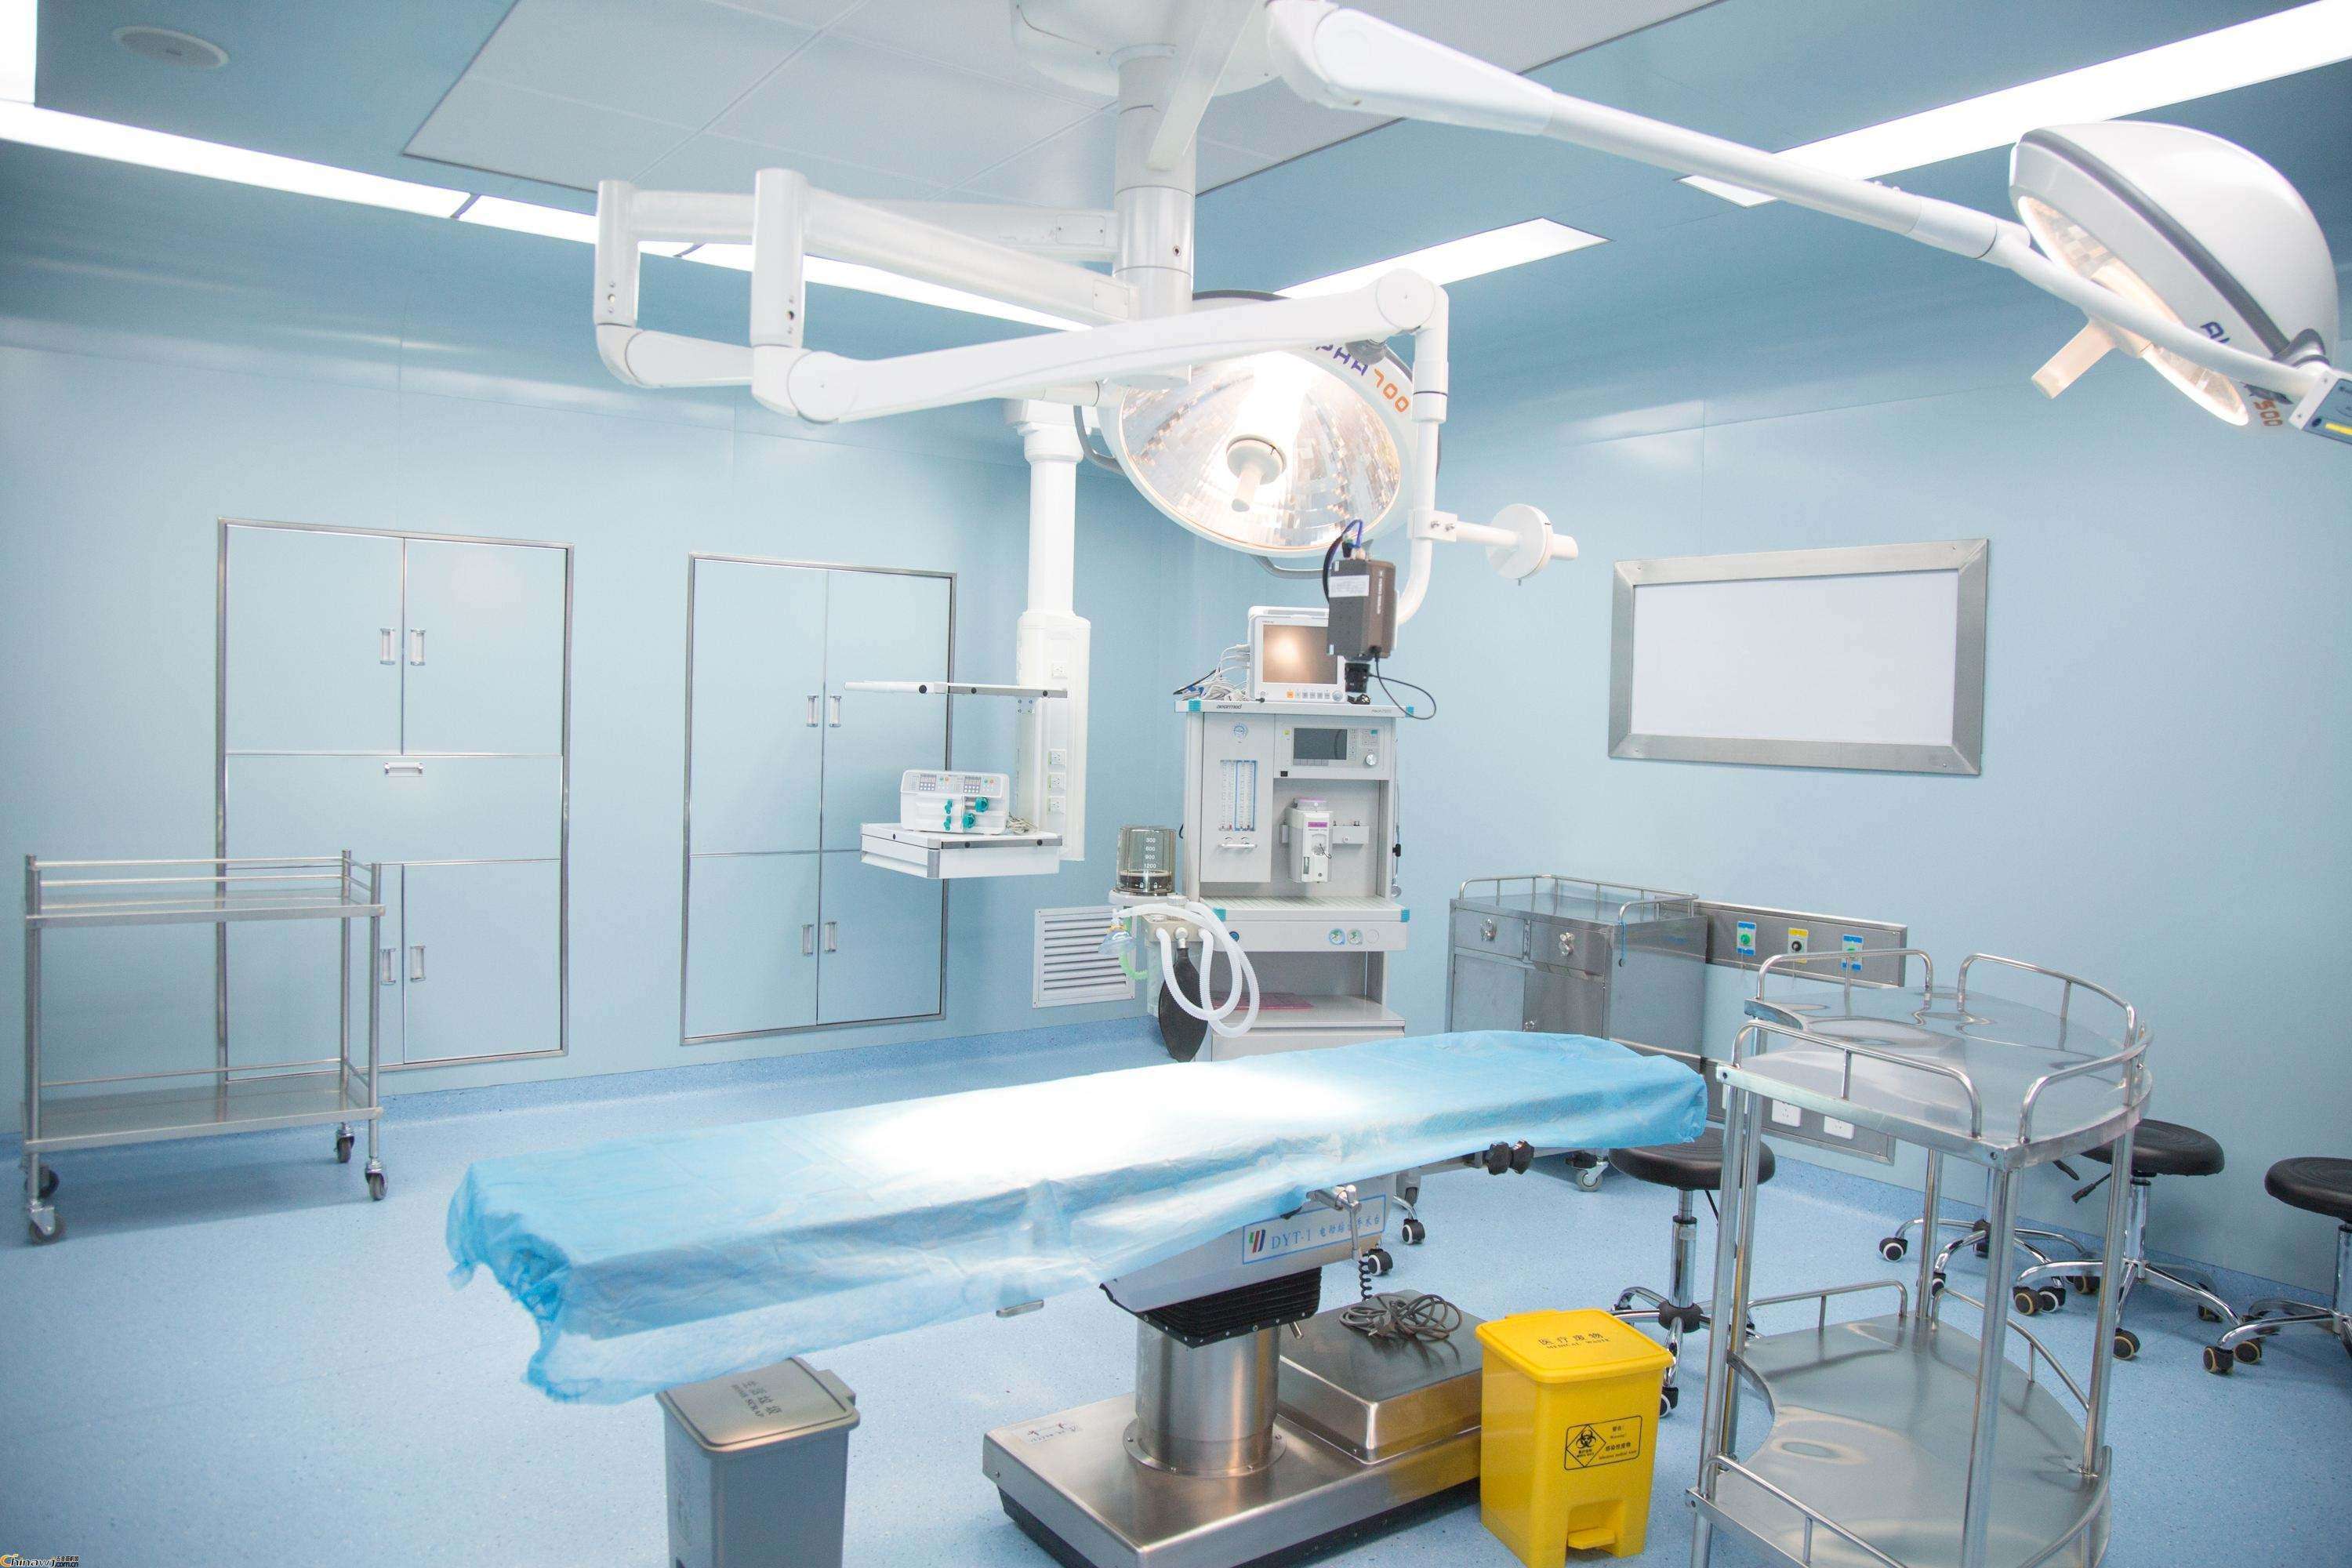 >Daily Maintenance and Management of Laminar Flow Purification Operating Room